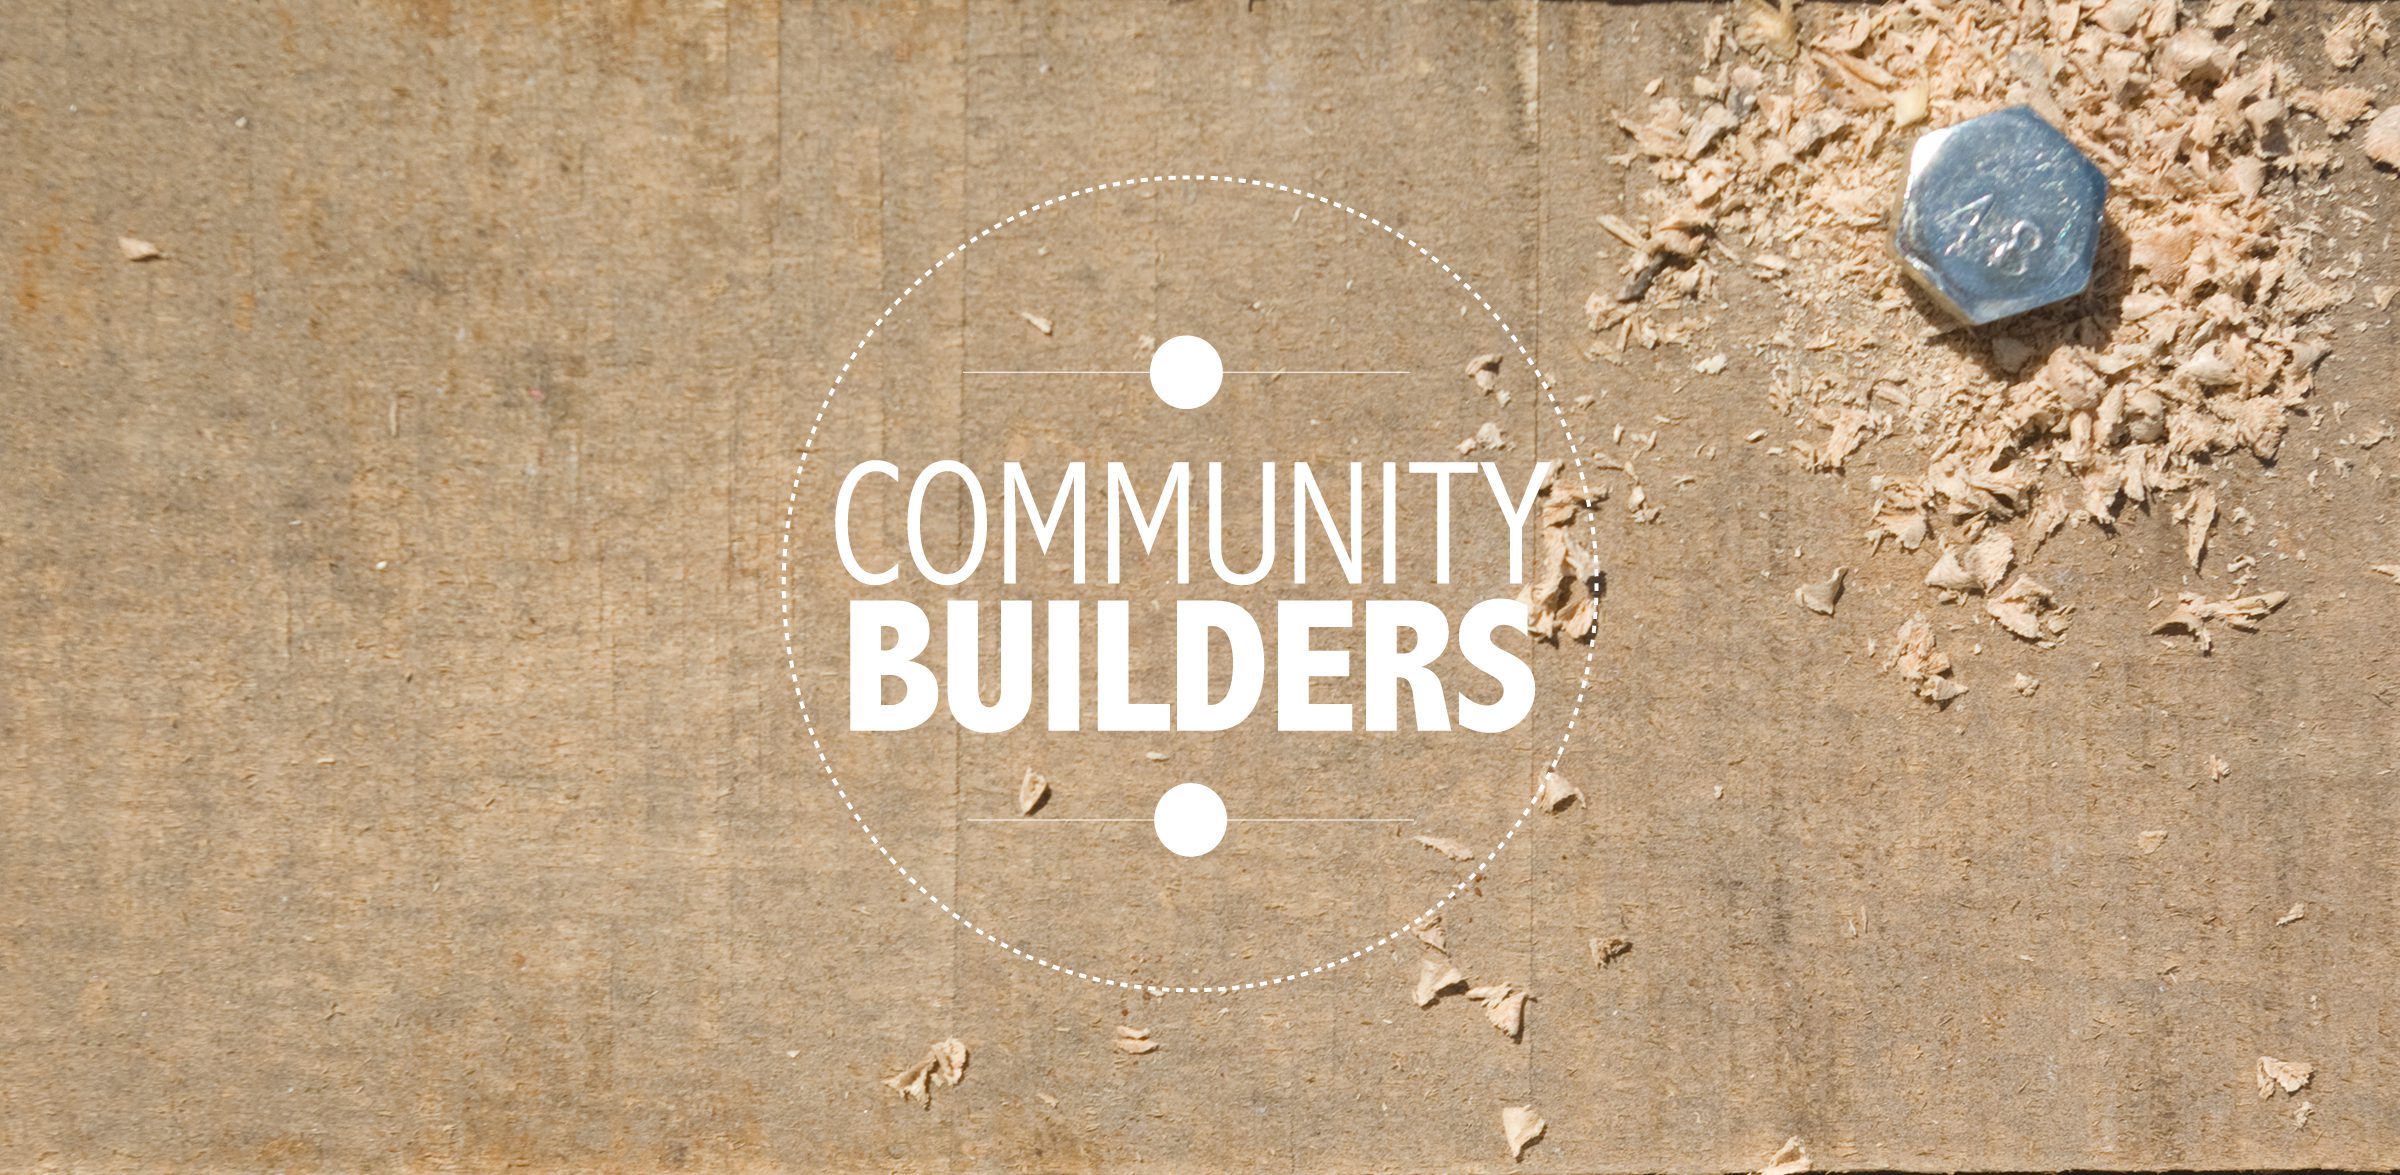 Community Builders logo on a wood background 